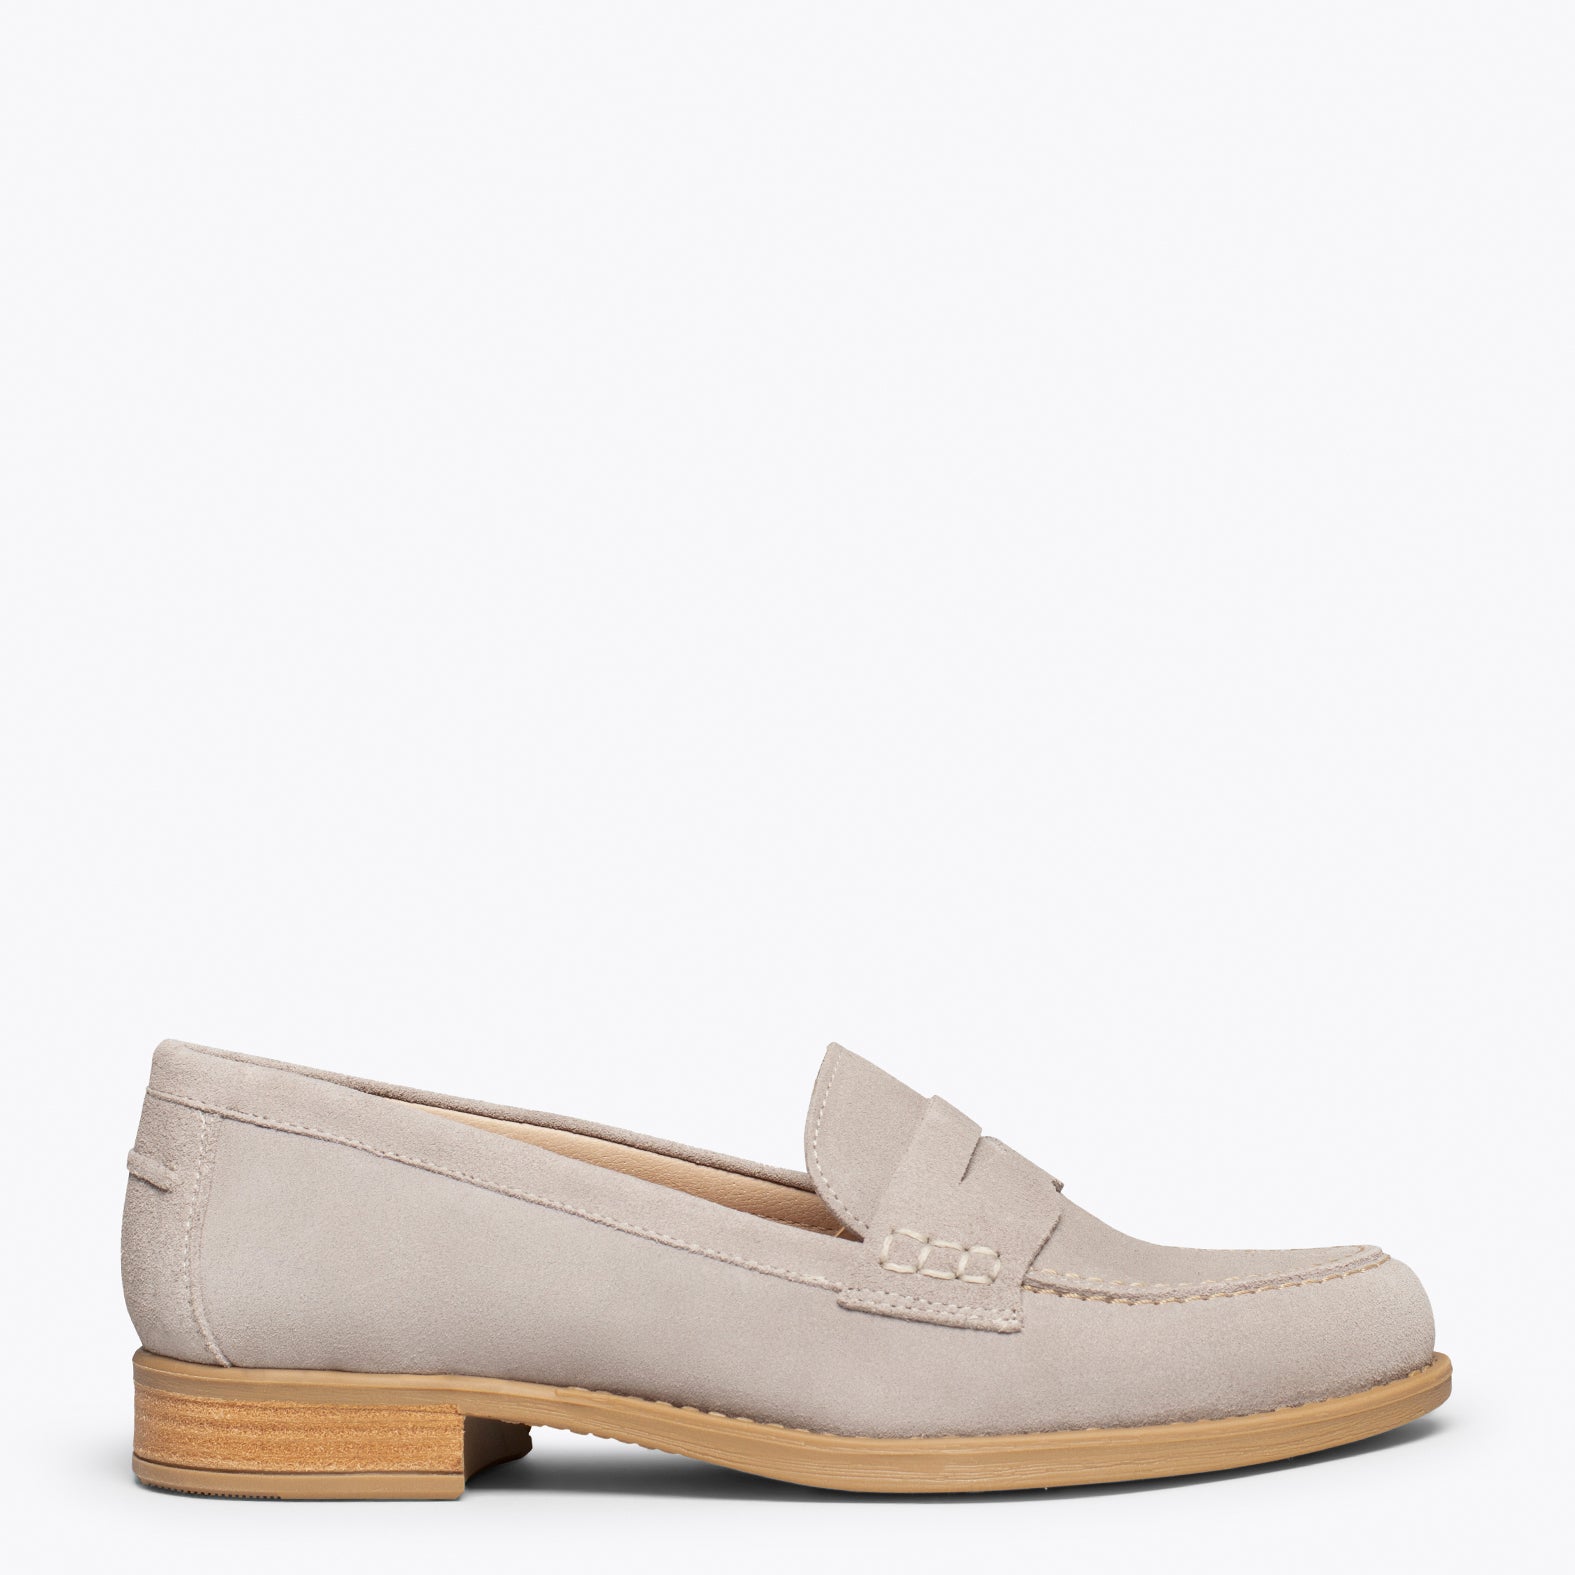 CASTELLANO – GREY suede leather moccasin